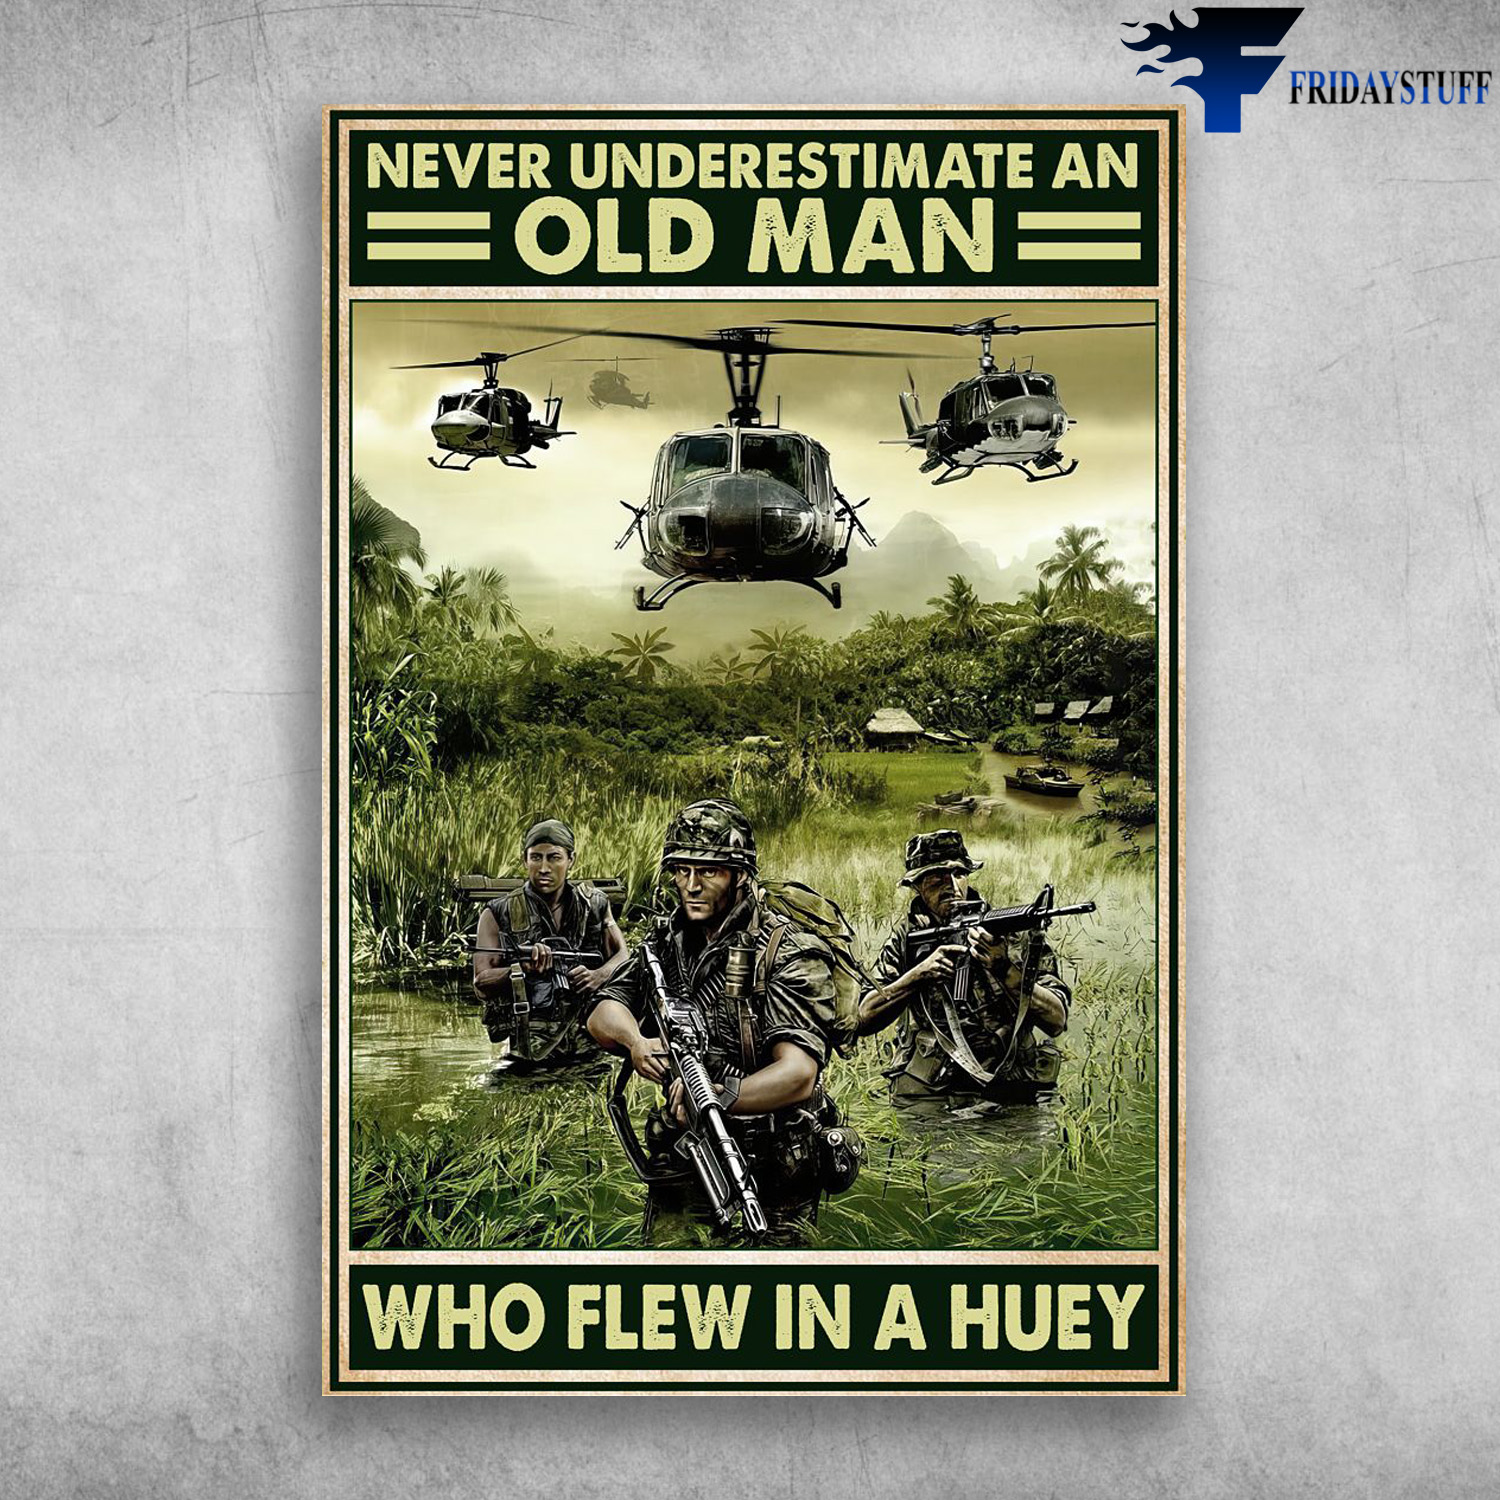 Old Man Flew In A Huey - Never Underestimate An Old Man, Who Flew In A Huey